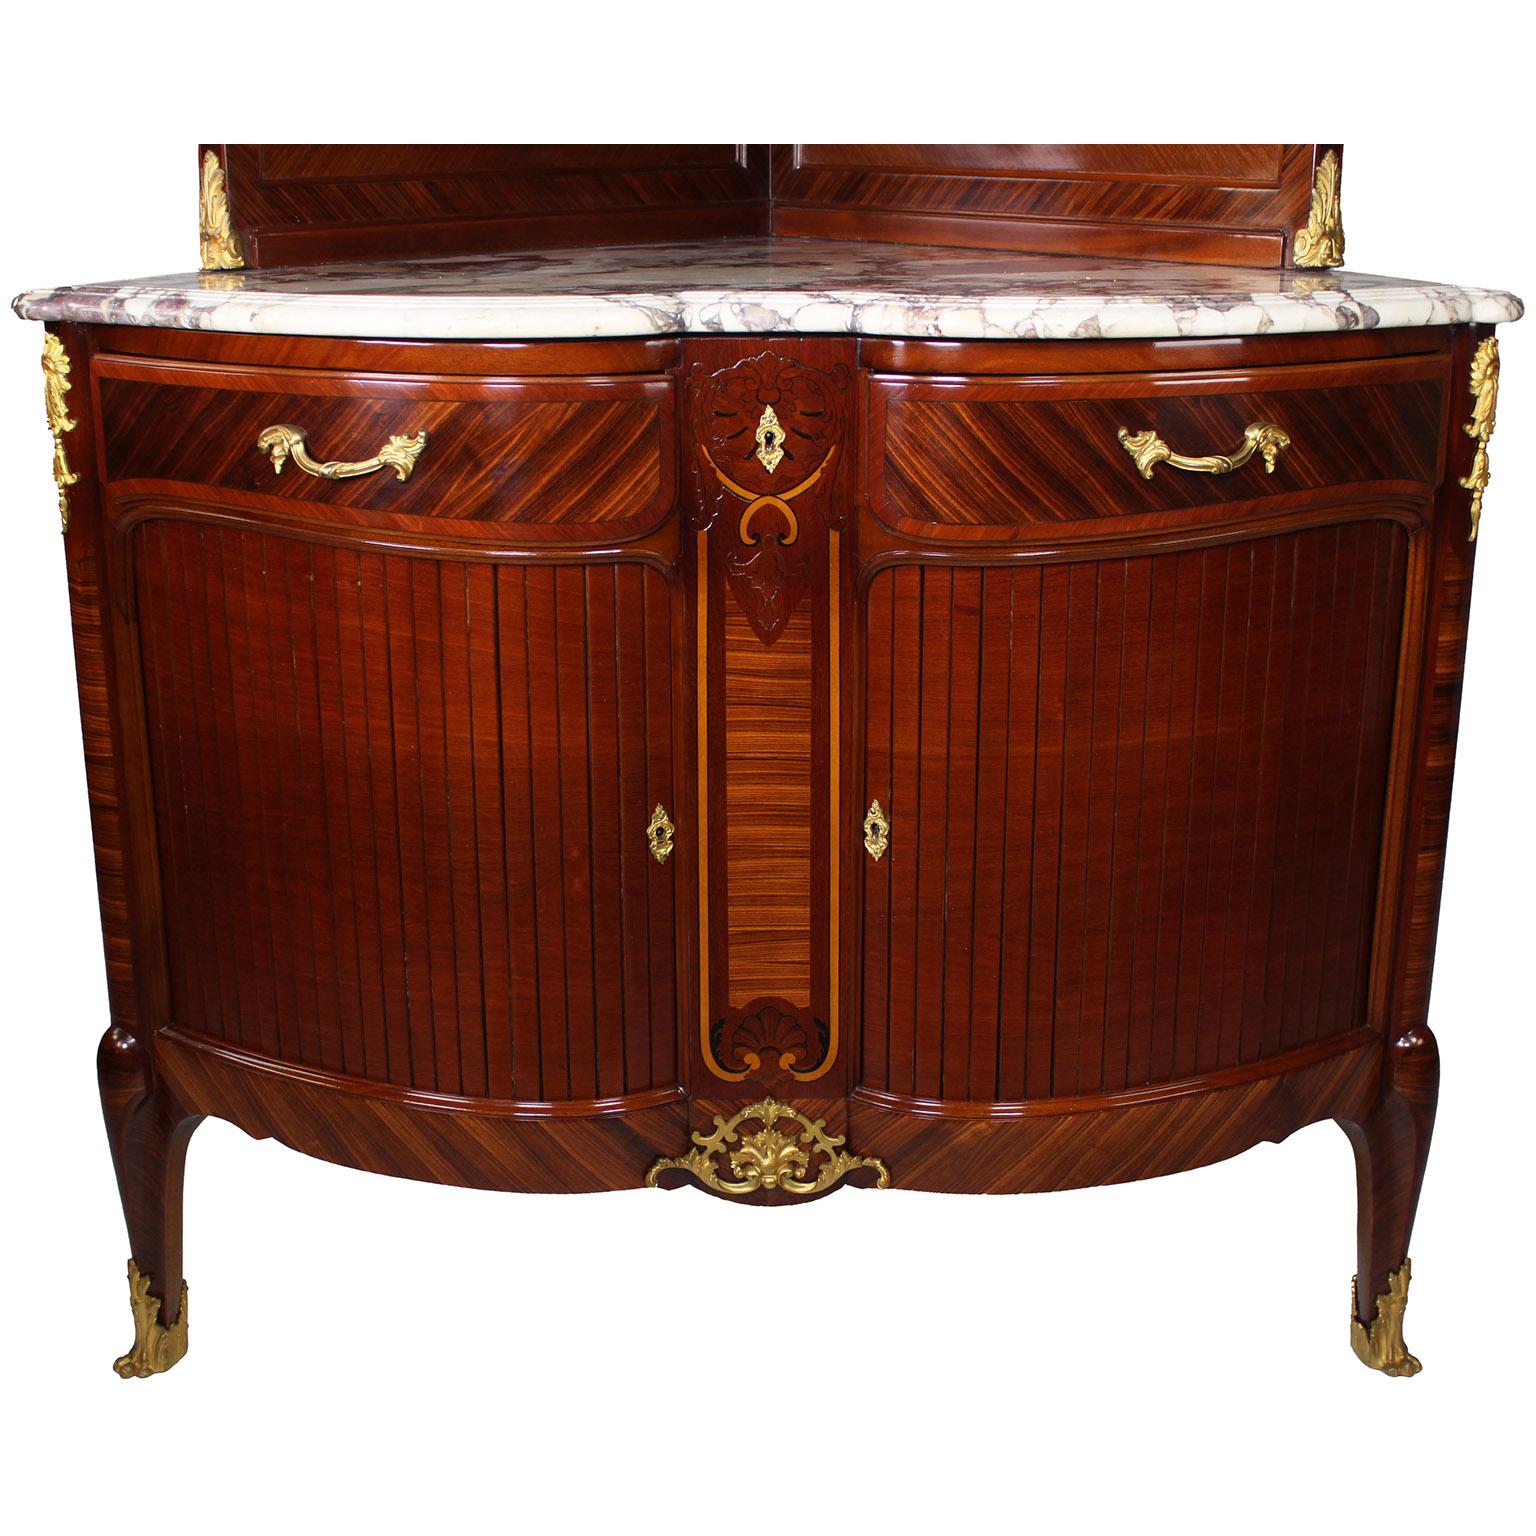 Impressive pair of French 19th century Louis XV style gilt bronze-mounted Kingwood and mahogany marquetry Encoigneurs, corner cabinets or vitrines, attributed to Paul Sormani. The upper section with molded cornice and shell cresting and enclosed by